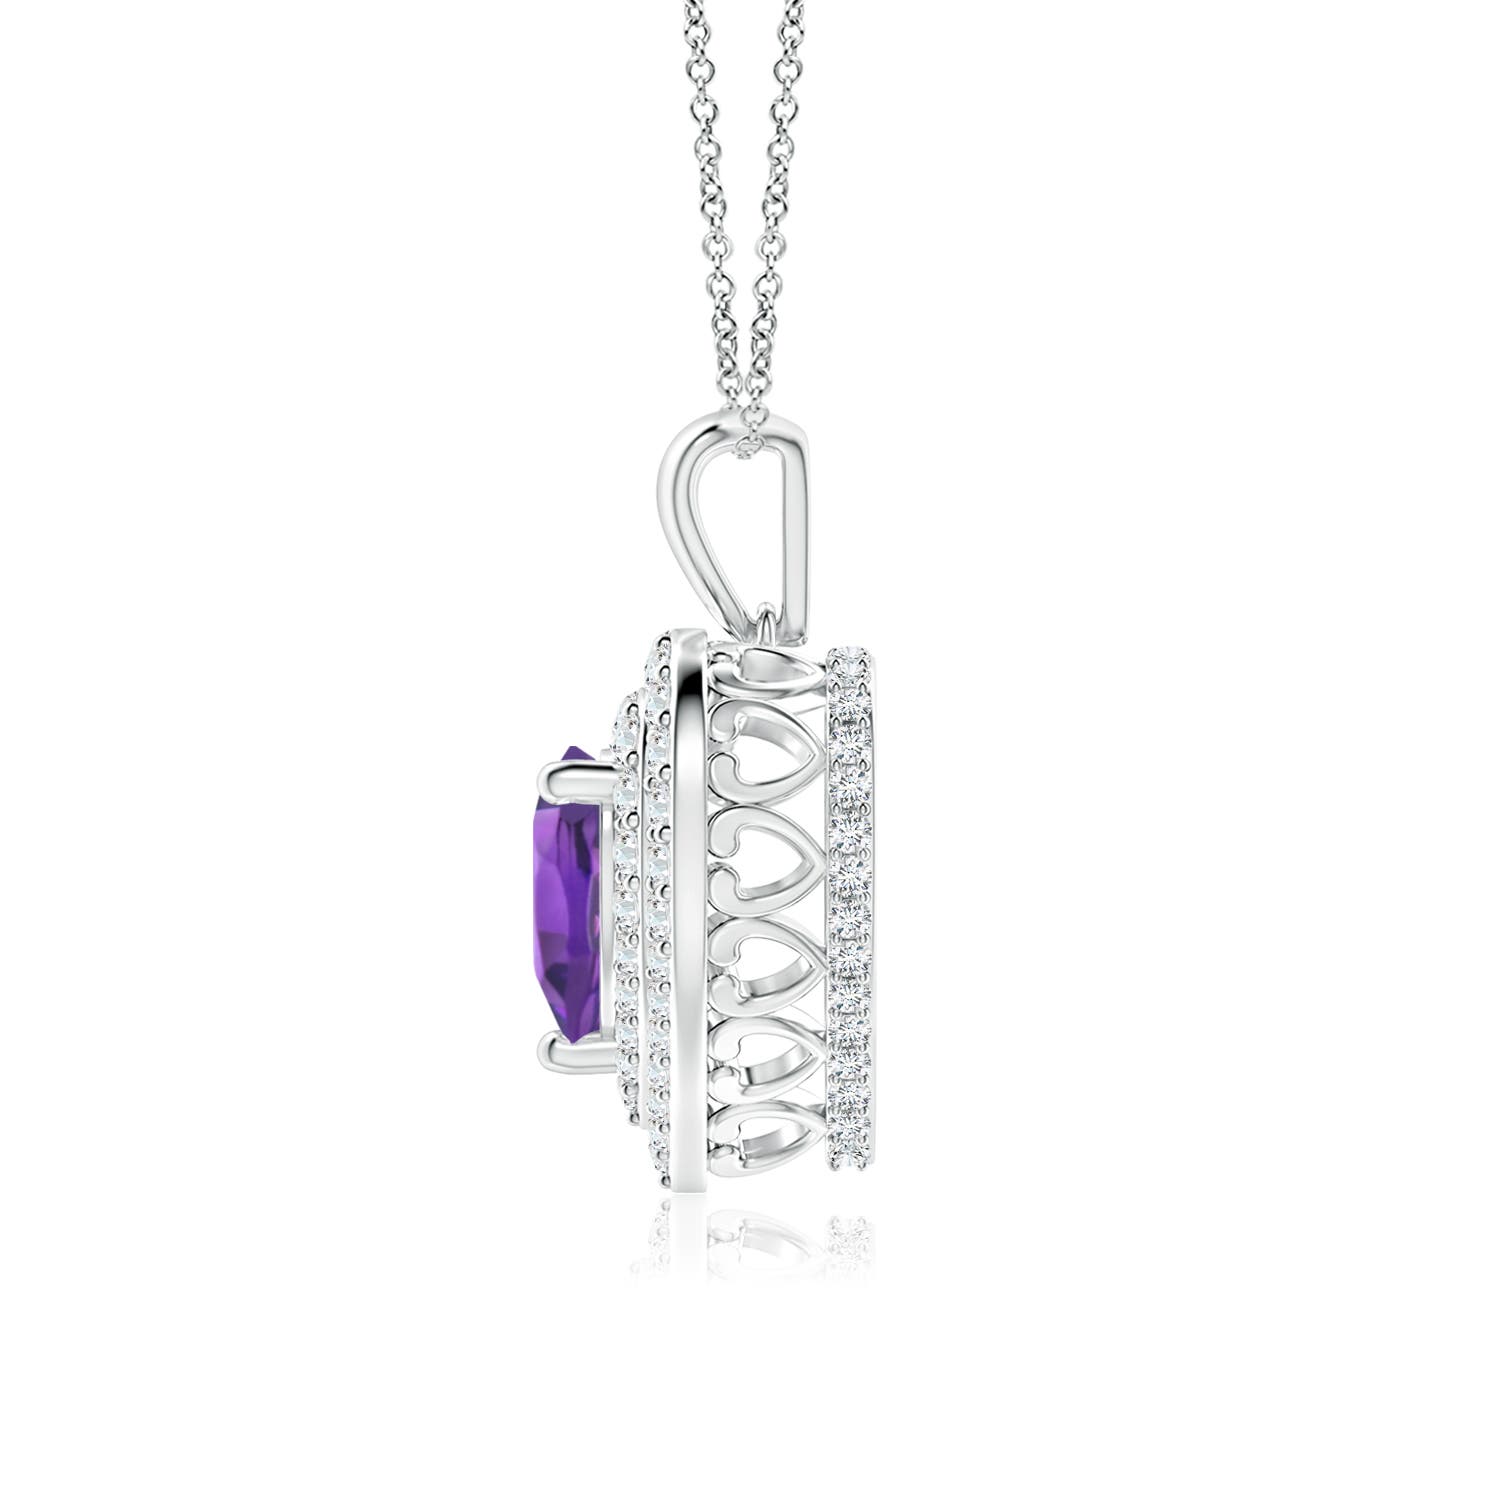 AAA - Amethyst / 1.53 CT / 14 KT White Gold